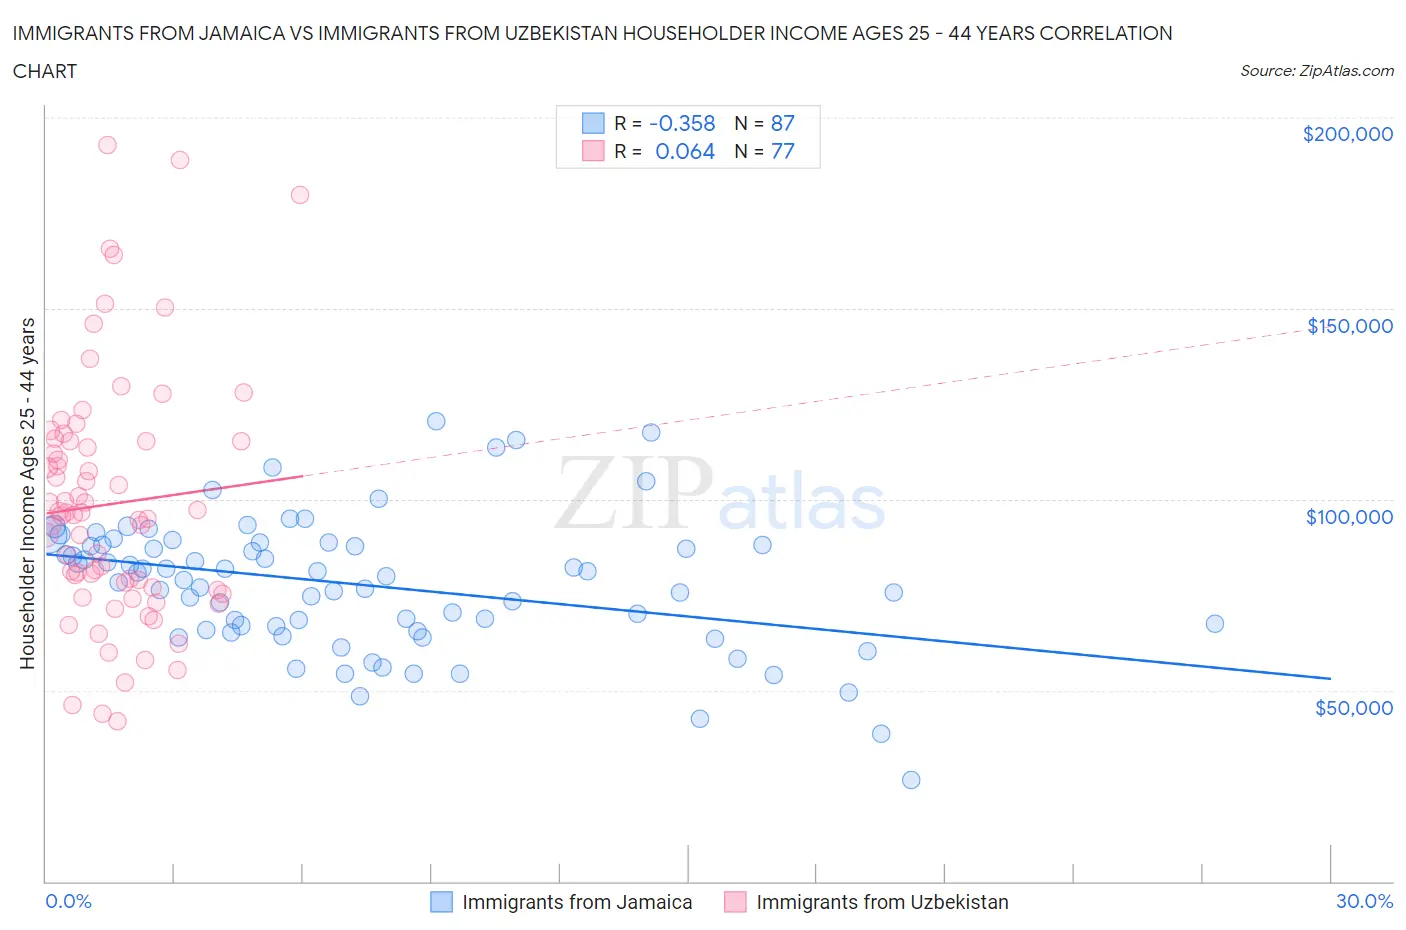 Immigrants from Jamaica vs Immigrants from Uzbekistan Householder Income Ages 25 - 44 years